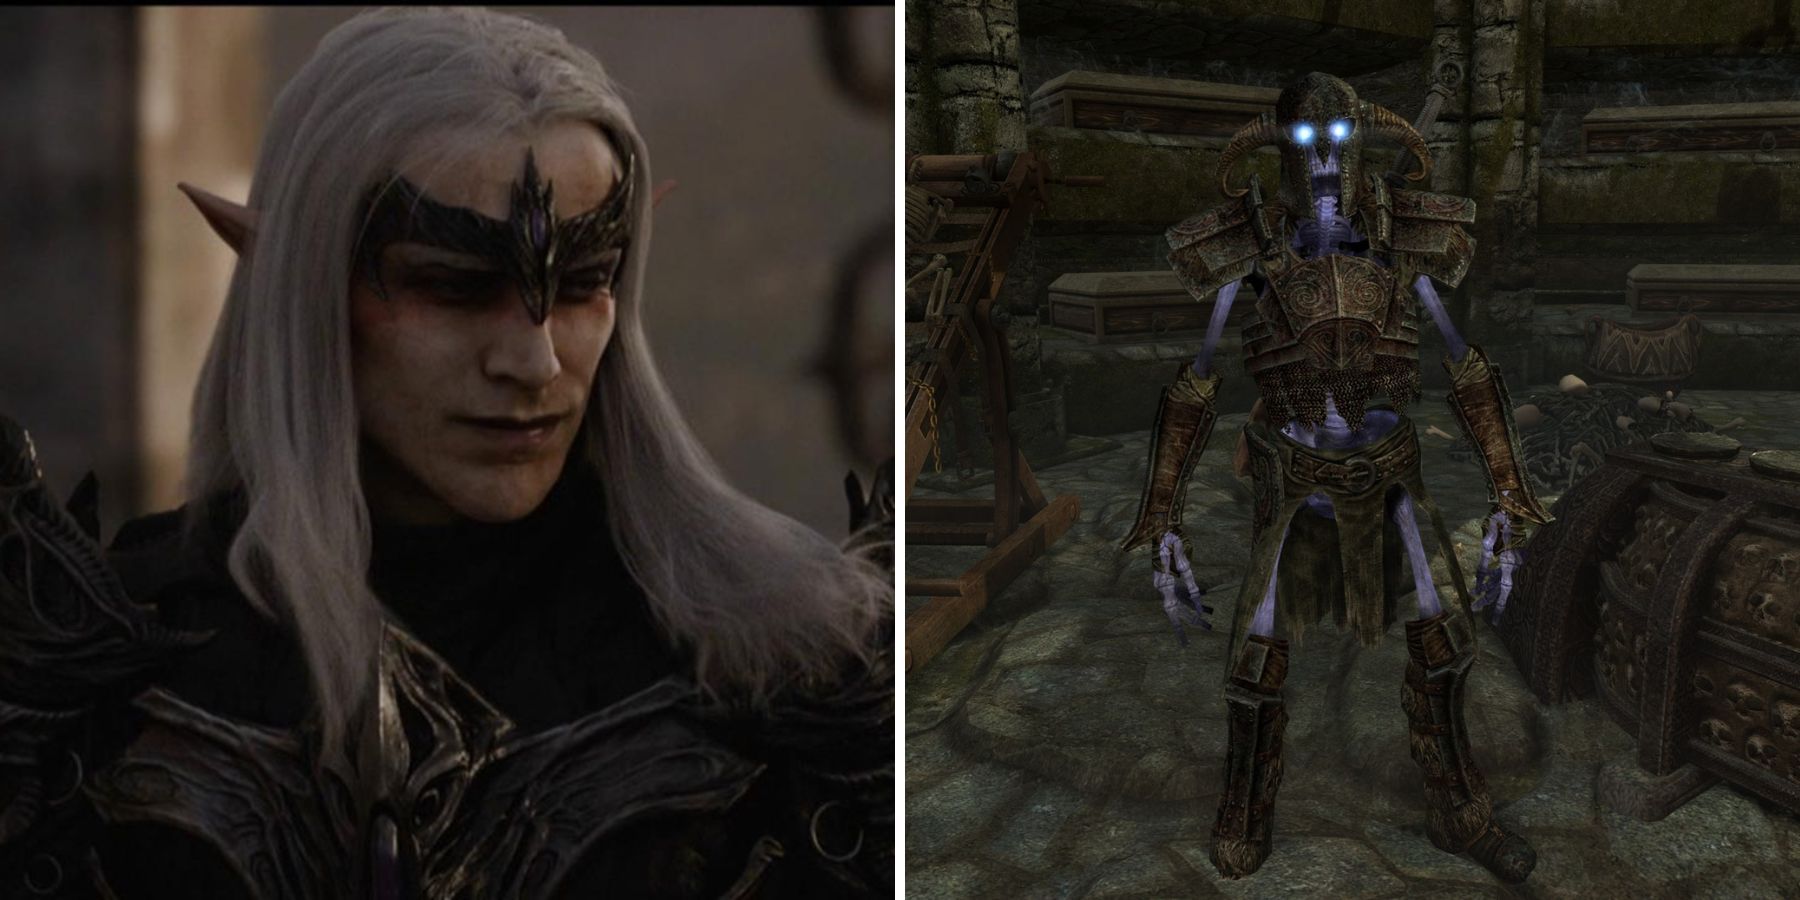 A quest connects Skyrim to The Elder Scrolls Online in terms of lore